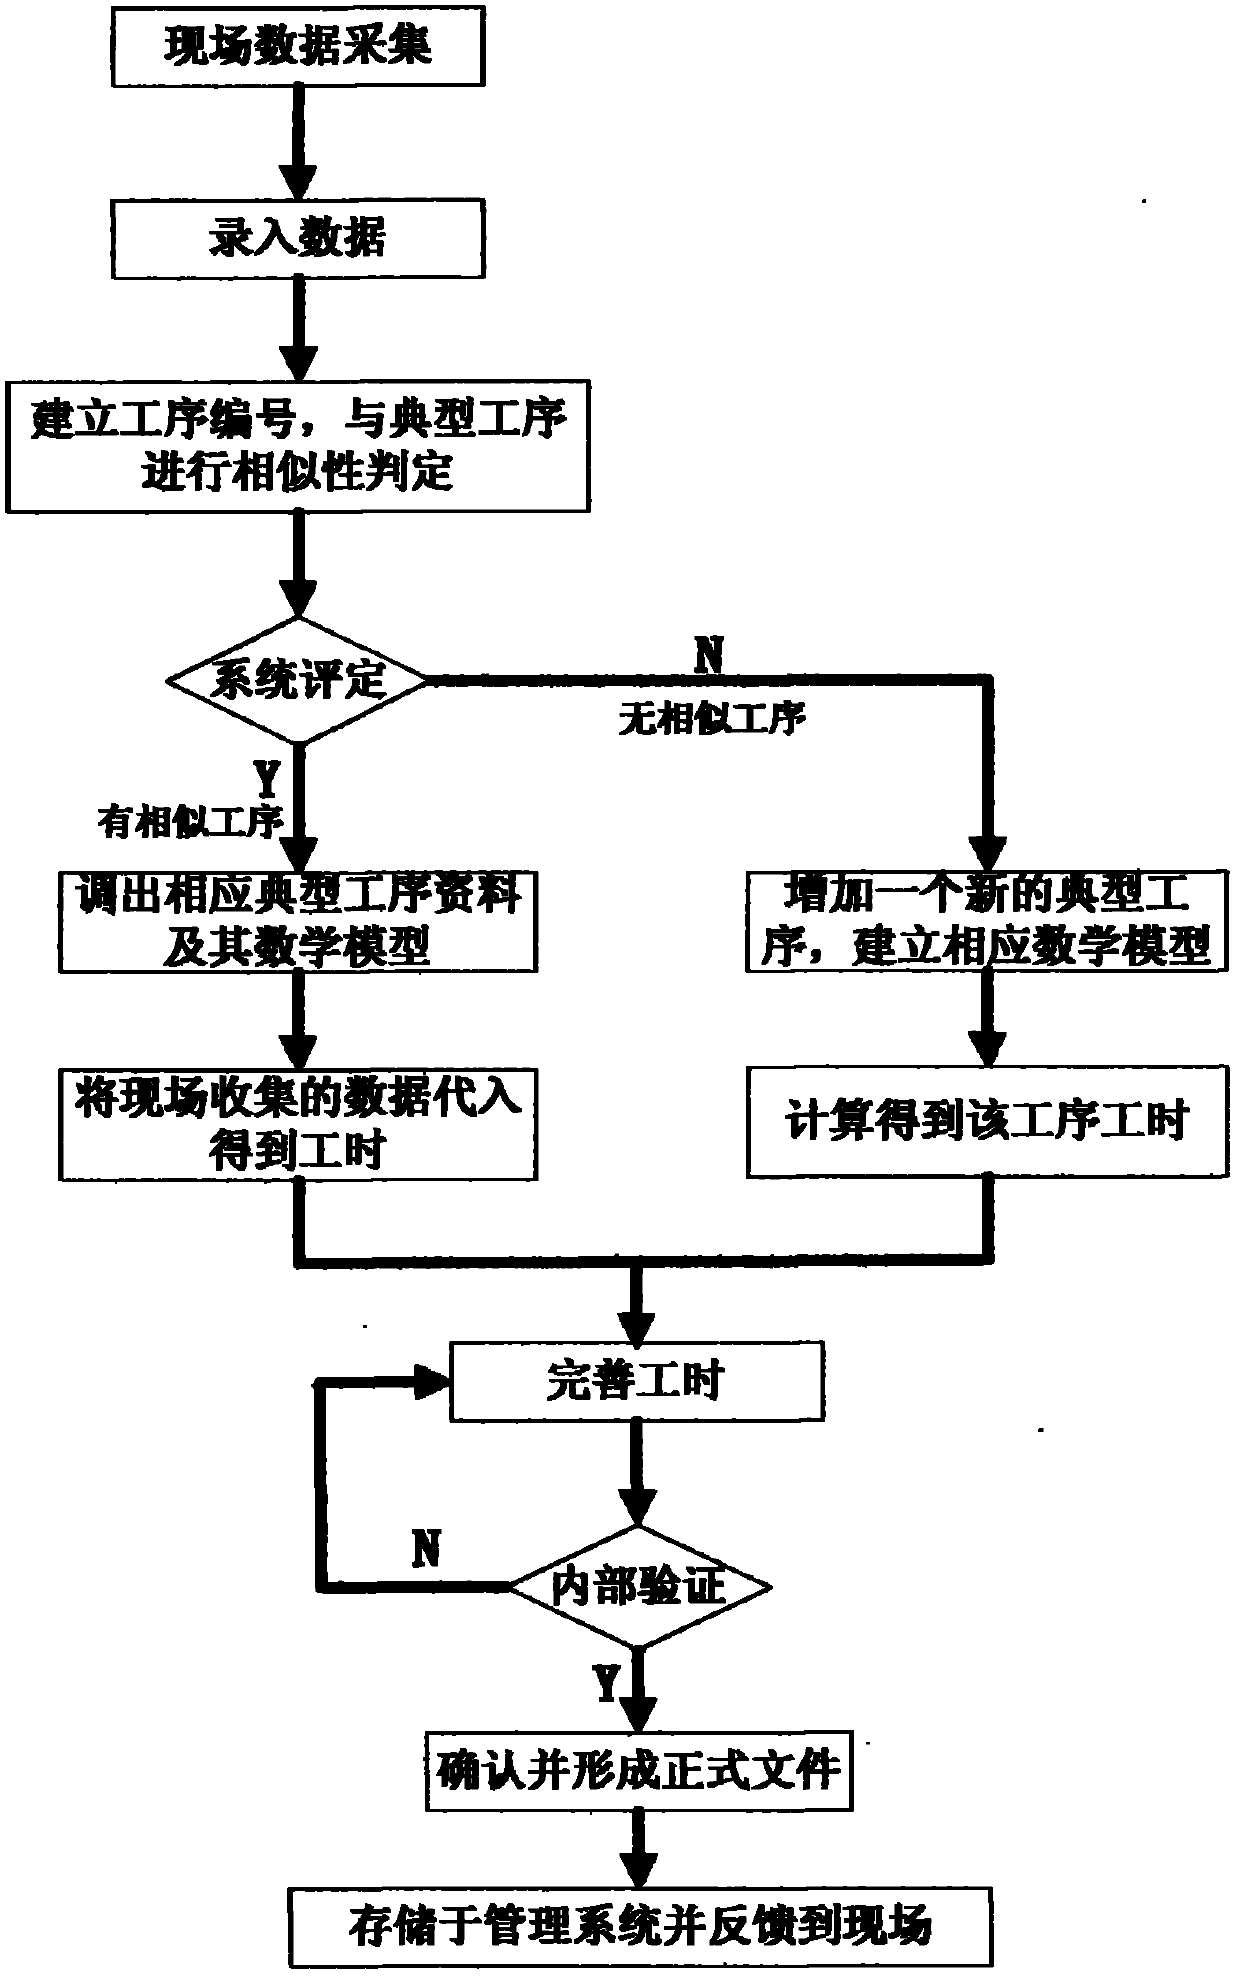 Method for modifying labor time standard and labor time standard management system